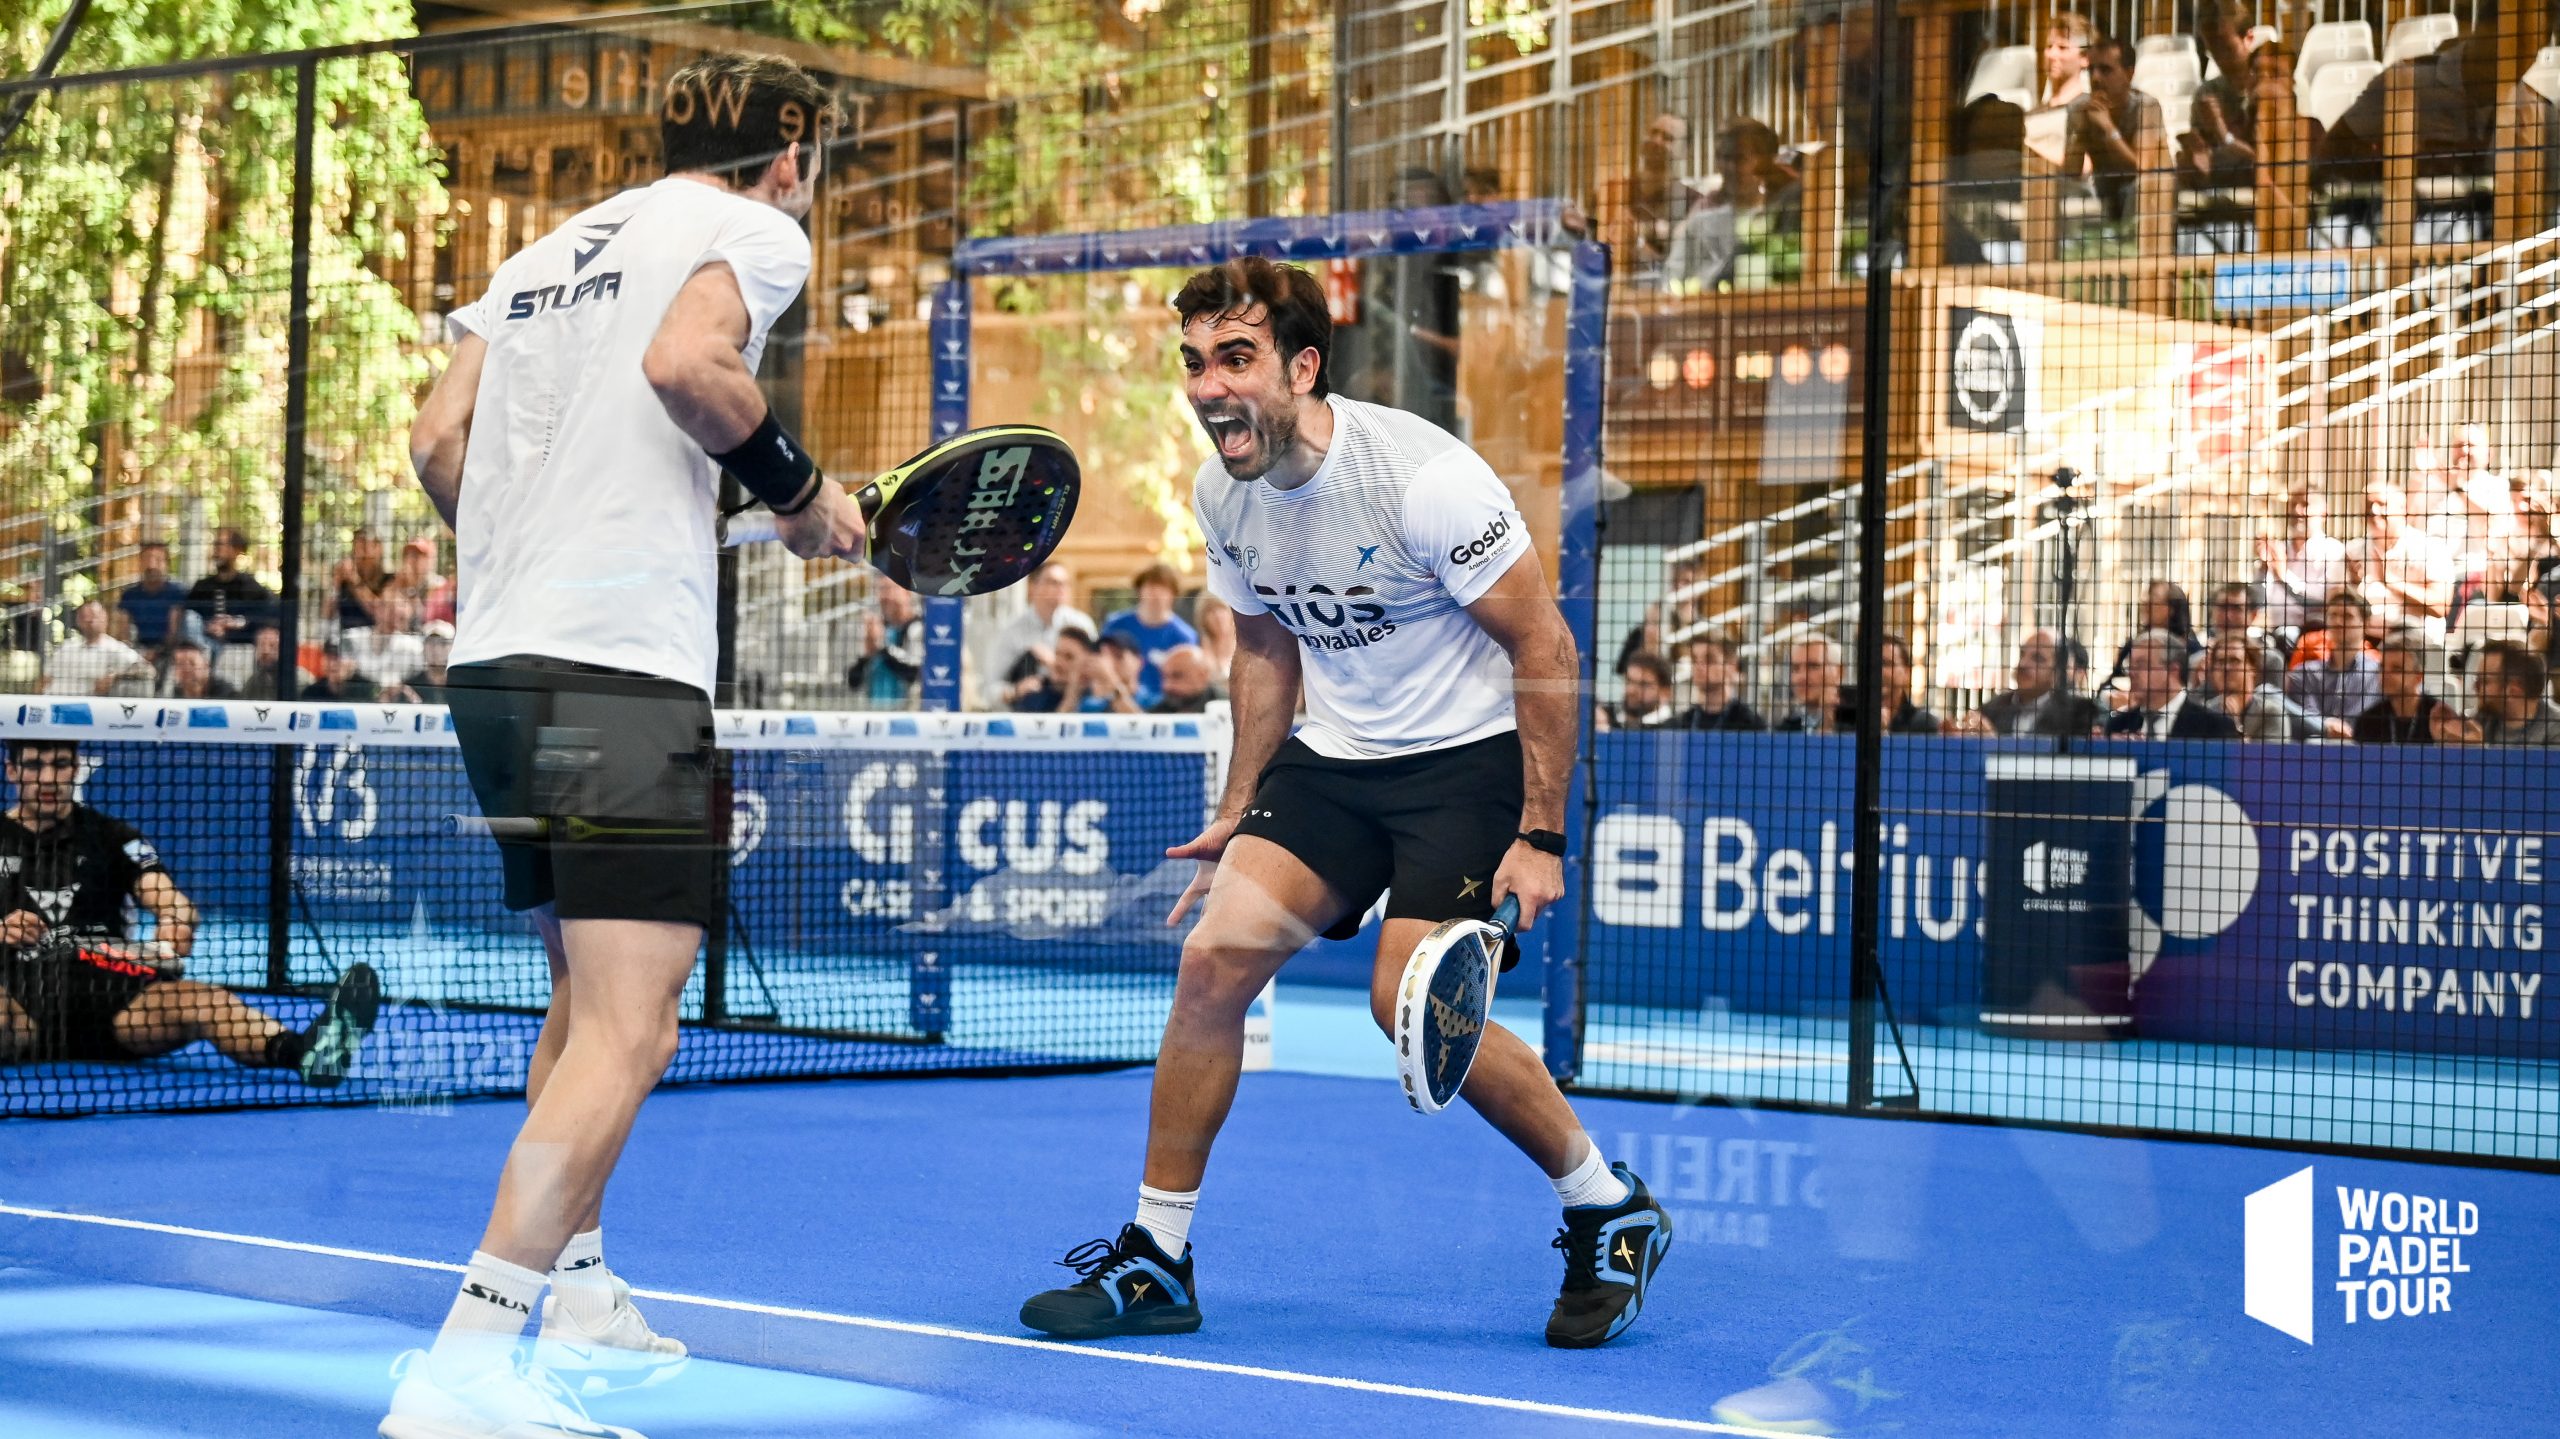 Stupaczuk and Lima shine in Brussels to reach first final in first tournament